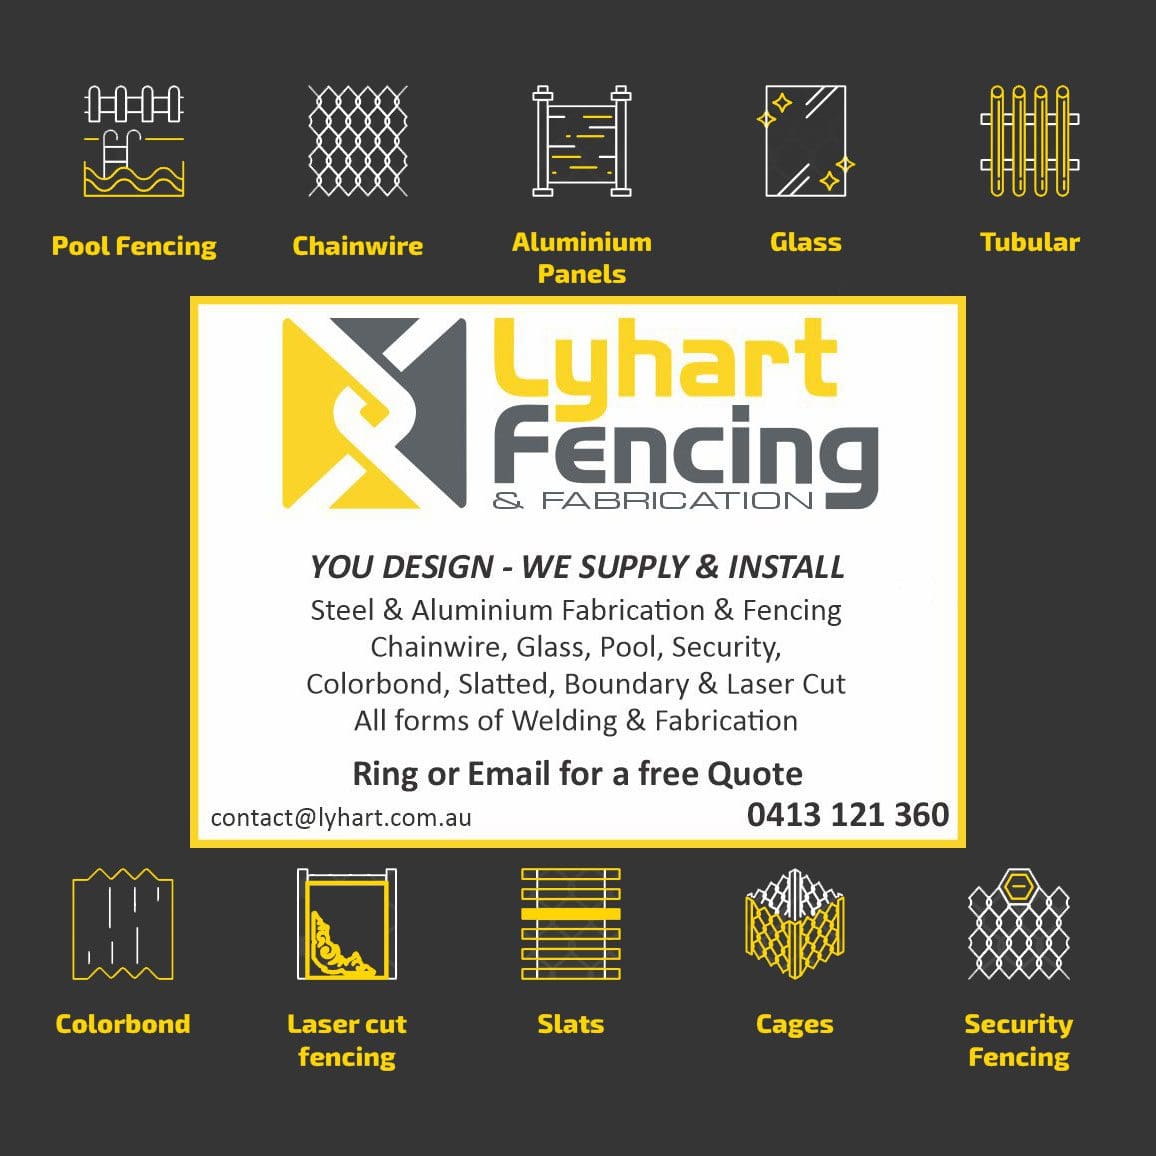 Lyhart Fencing and Fabrication Services